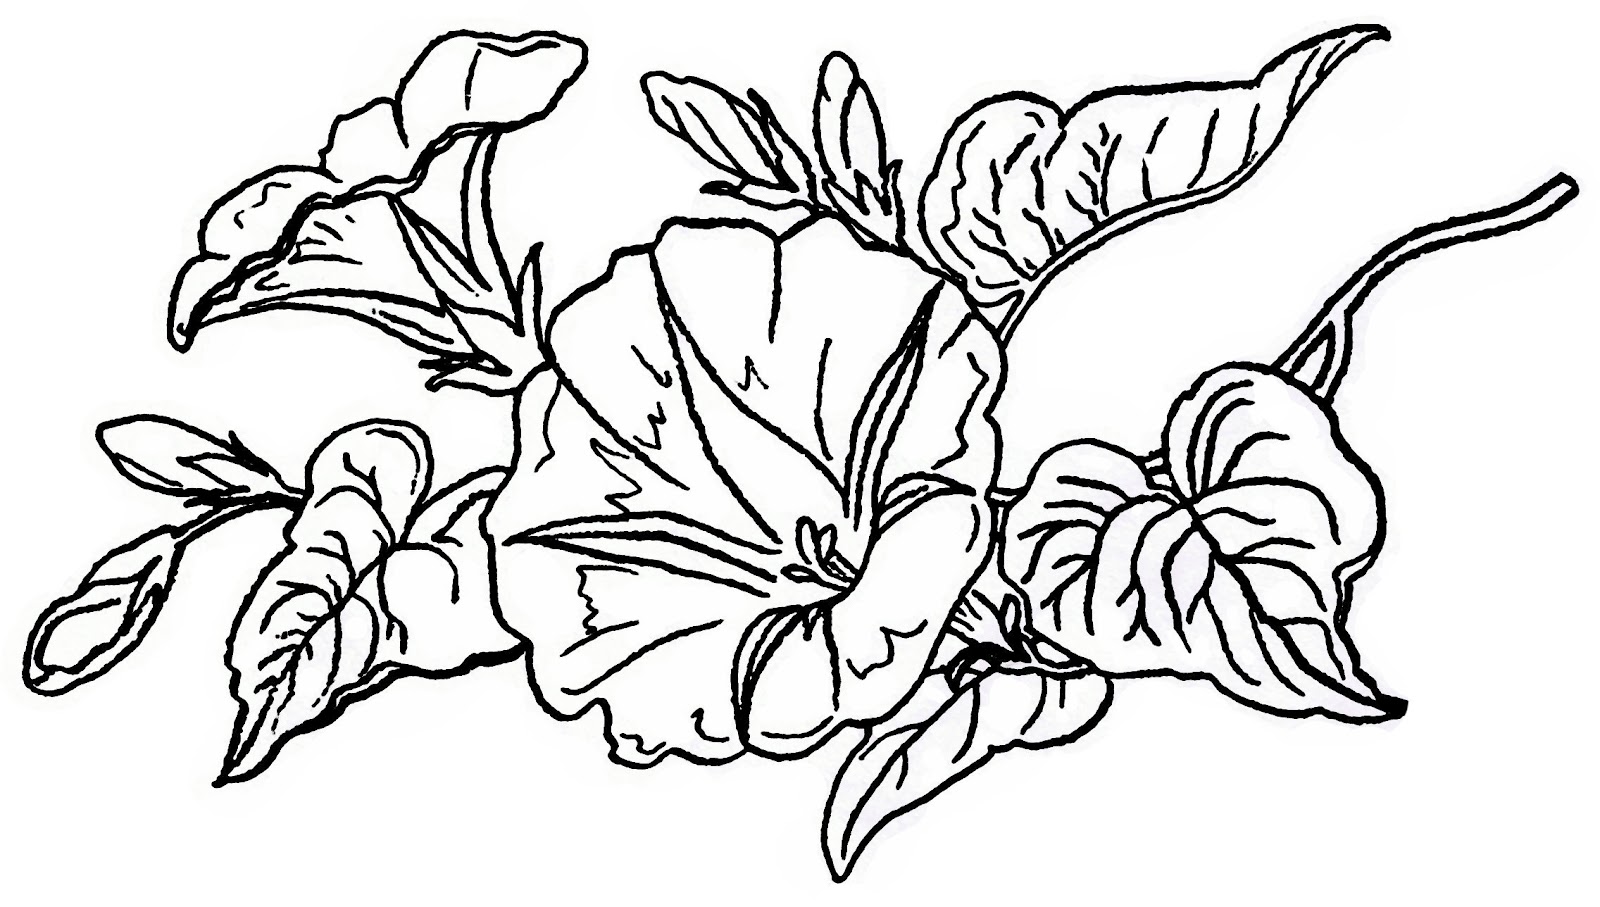 Morning Glory coloring #13, Download drawings